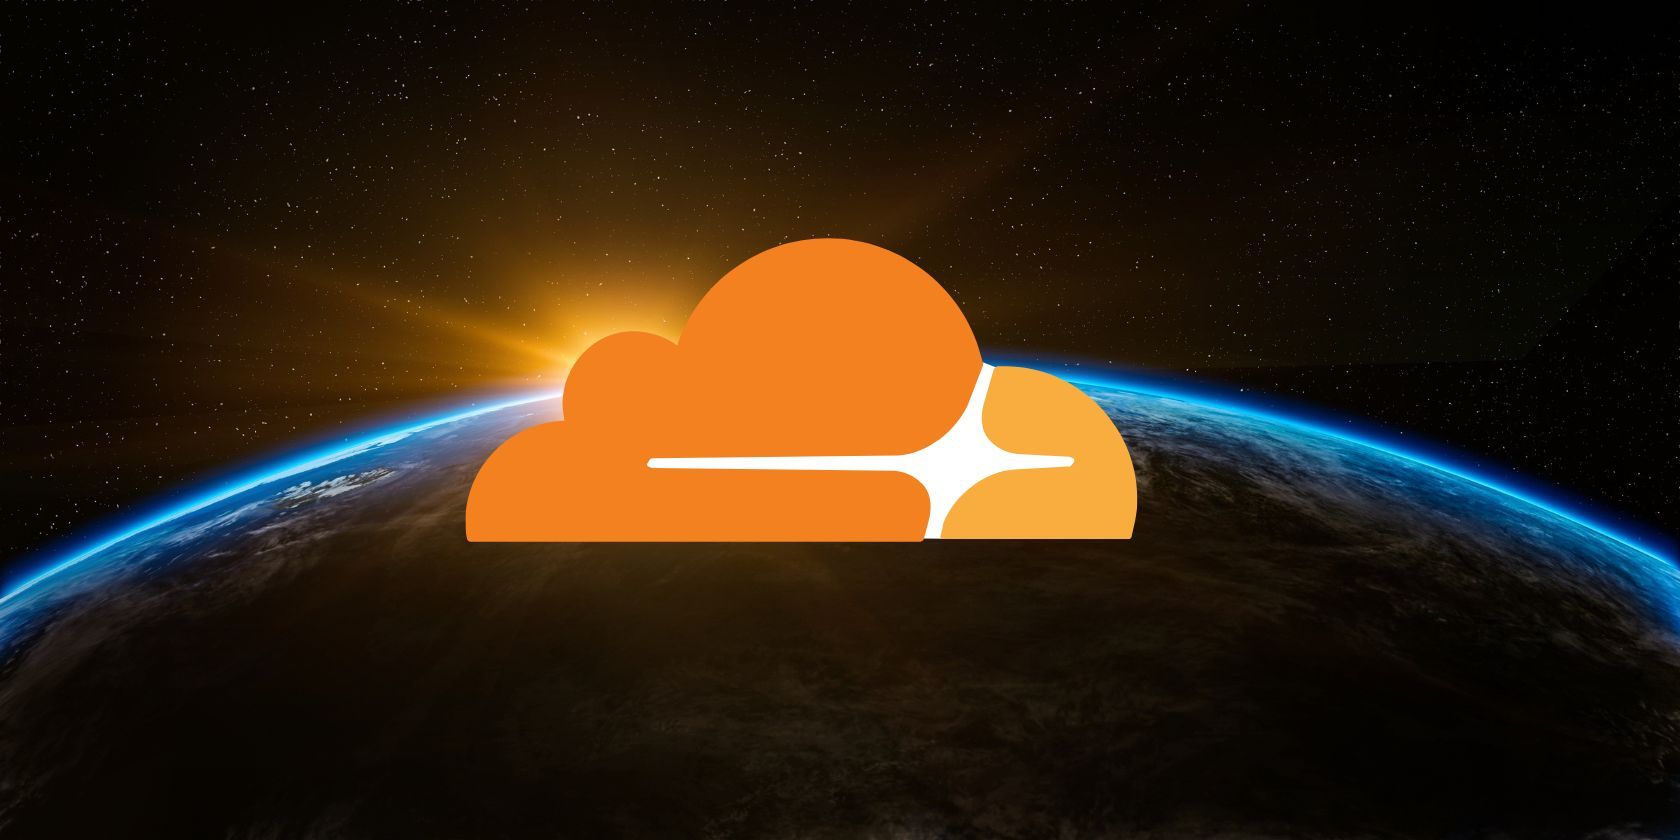 cloudflare logo on top of a space image